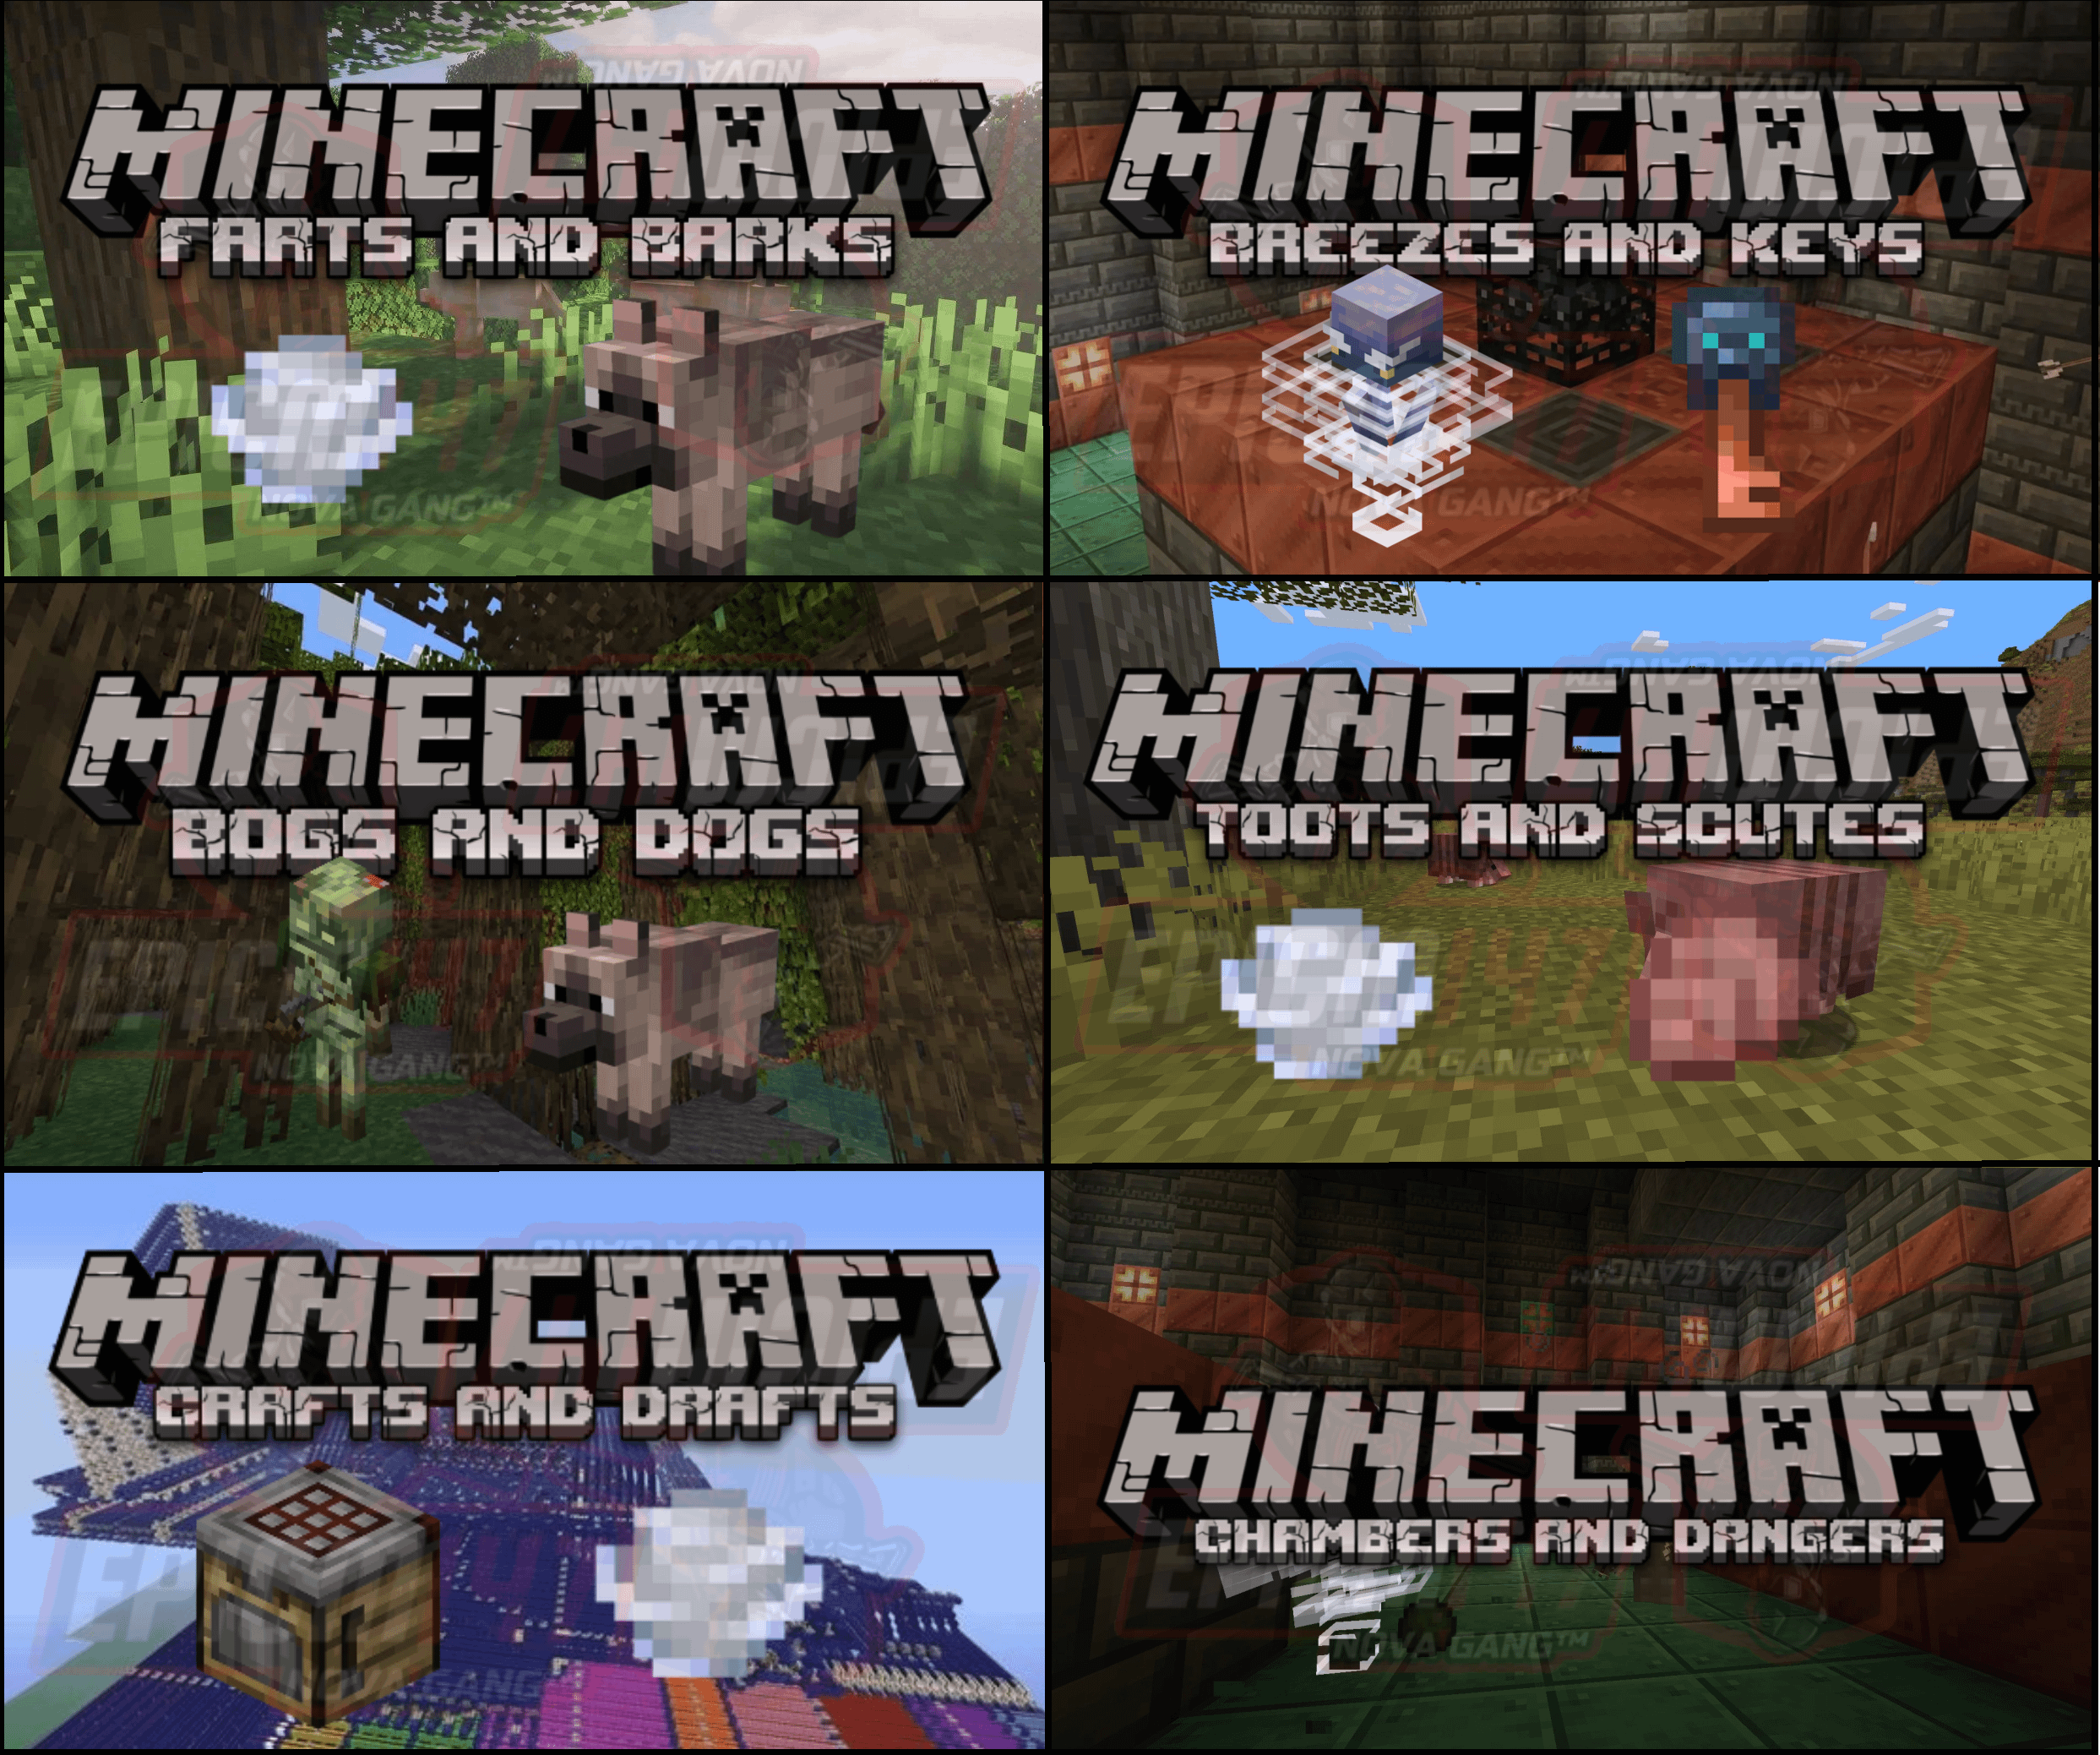 Minecraft Memes - "Top Minecraft Memes, pick your fave! 🔥"